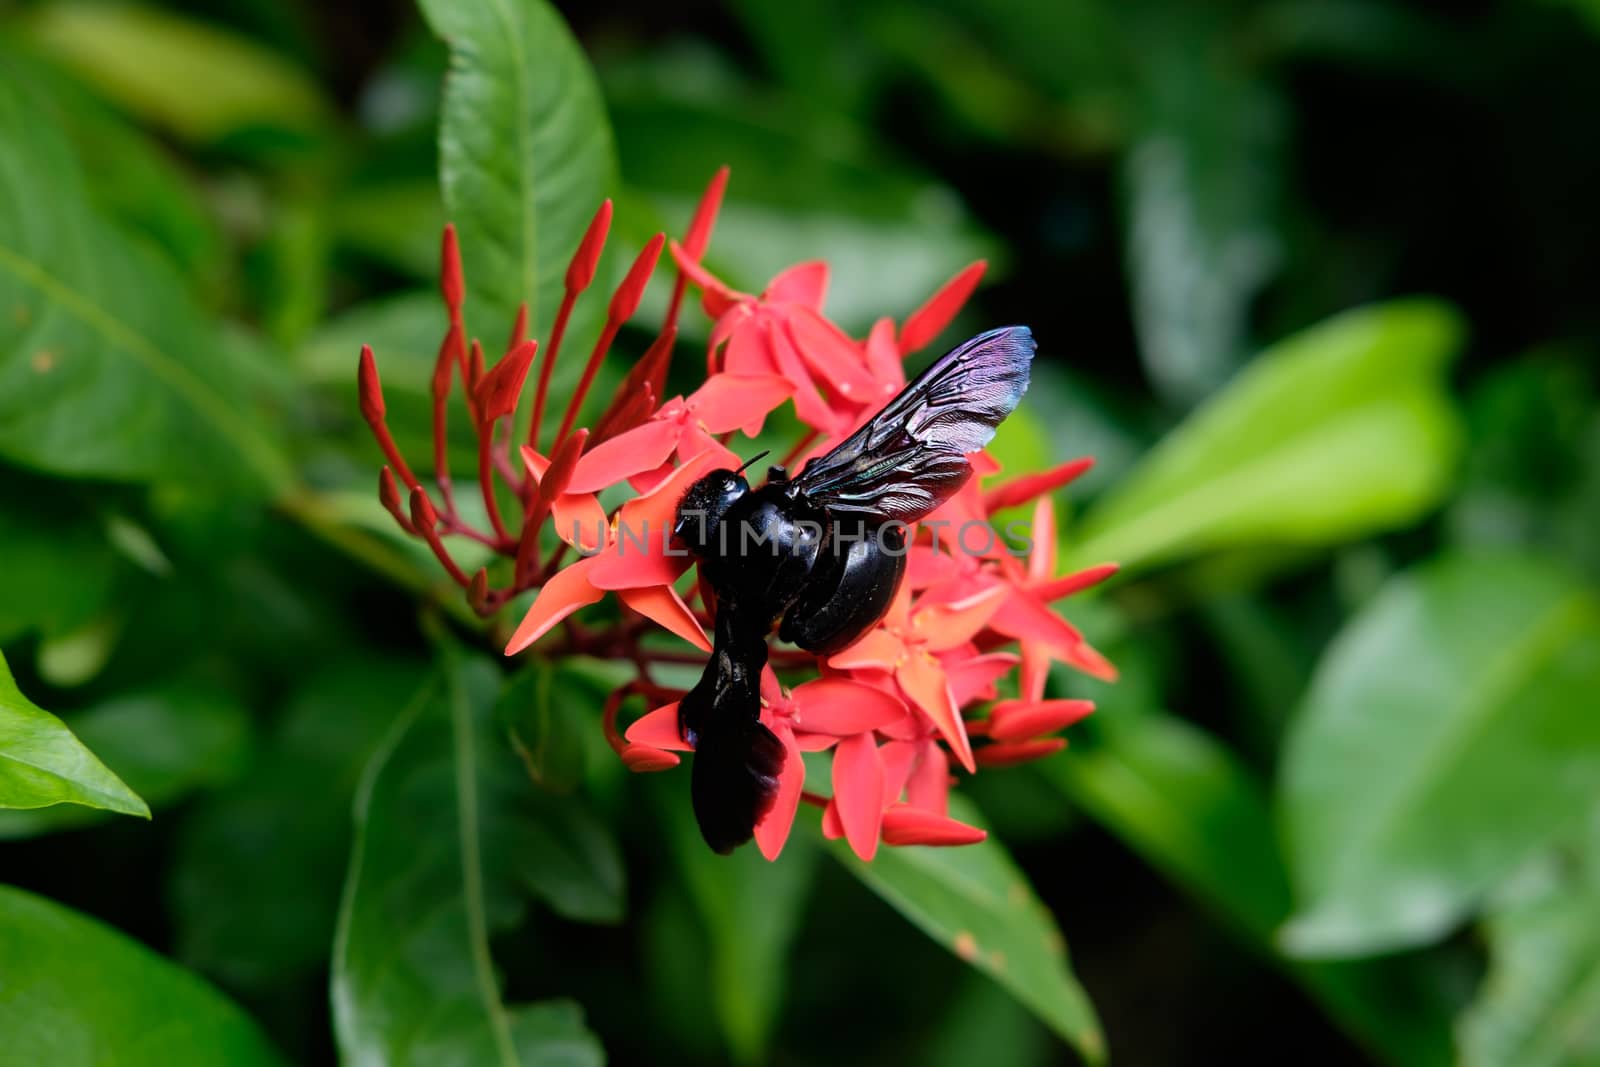 Black beetle with rainbow on wings seats on the nice red flower